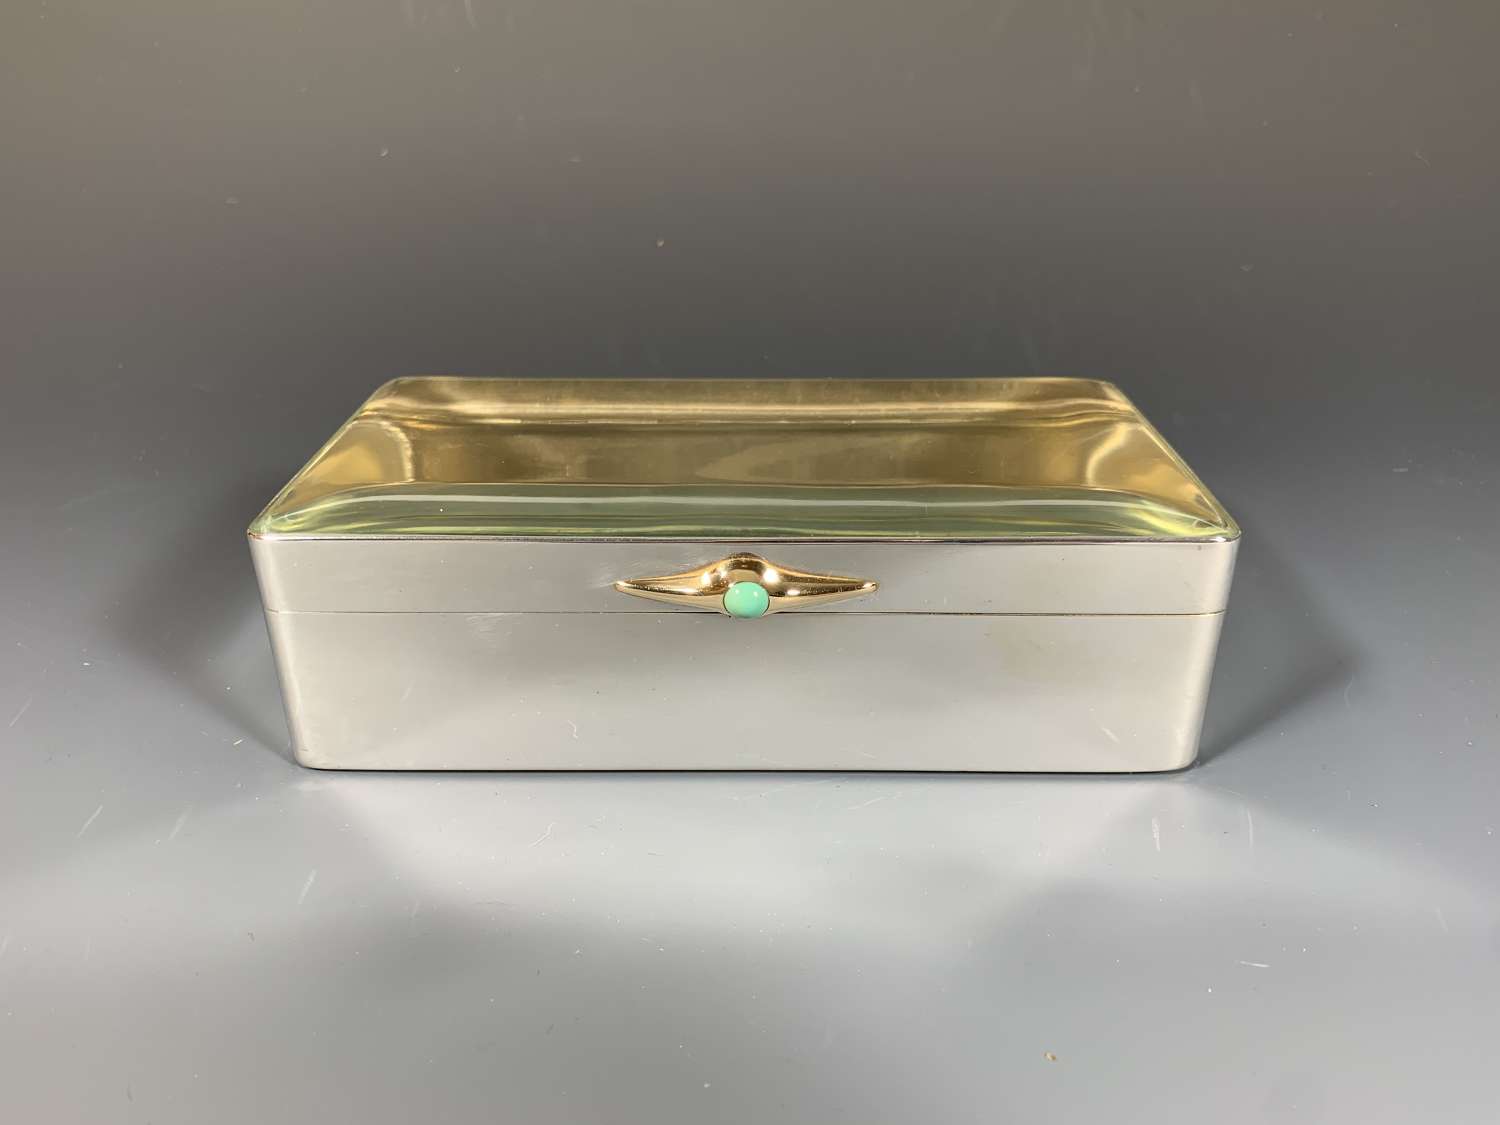 A silver and crystal cigar box, with an 18ct gold & turquoise caboch